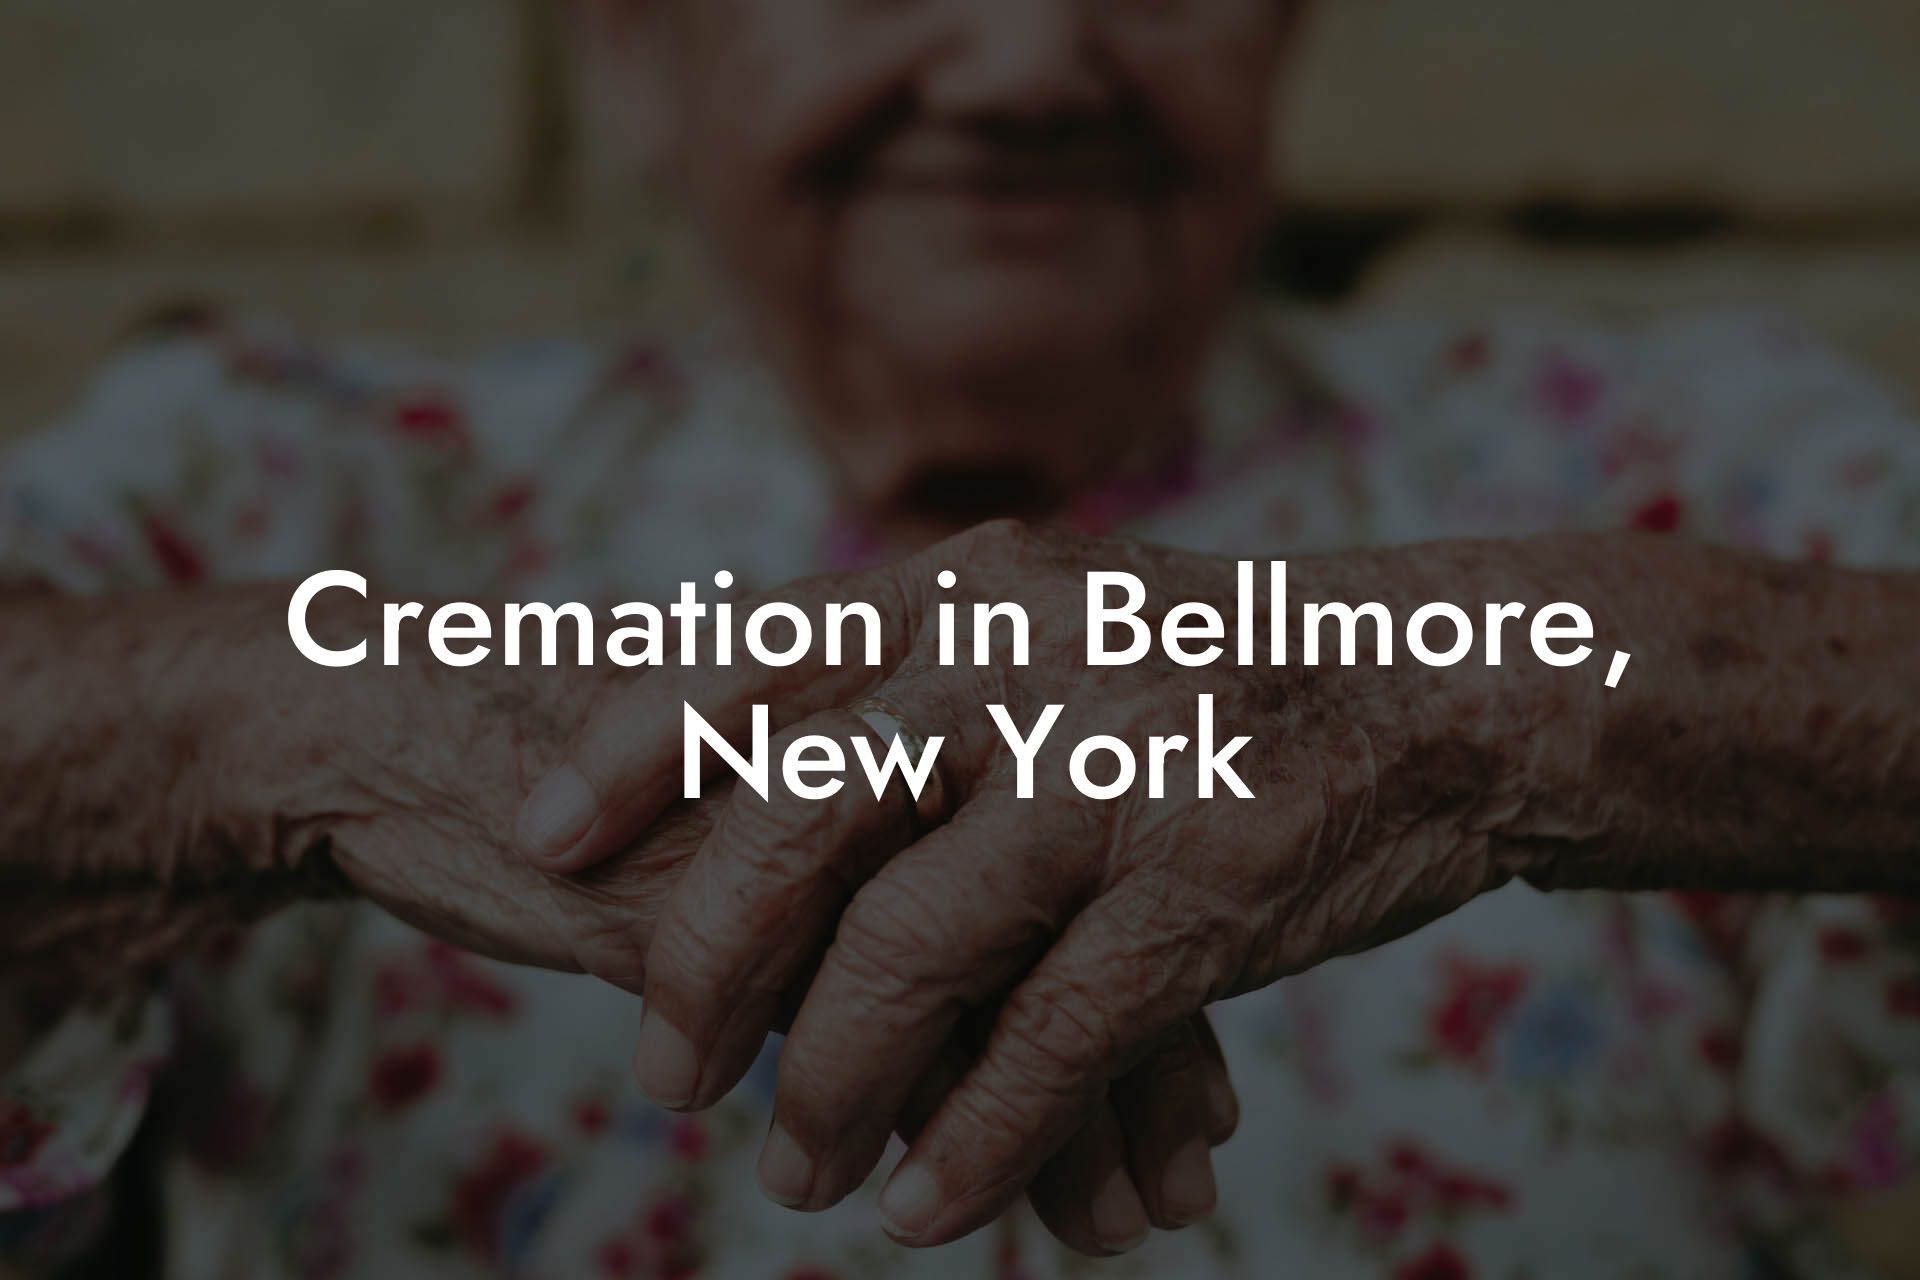 Cremation in Bellmore, New York